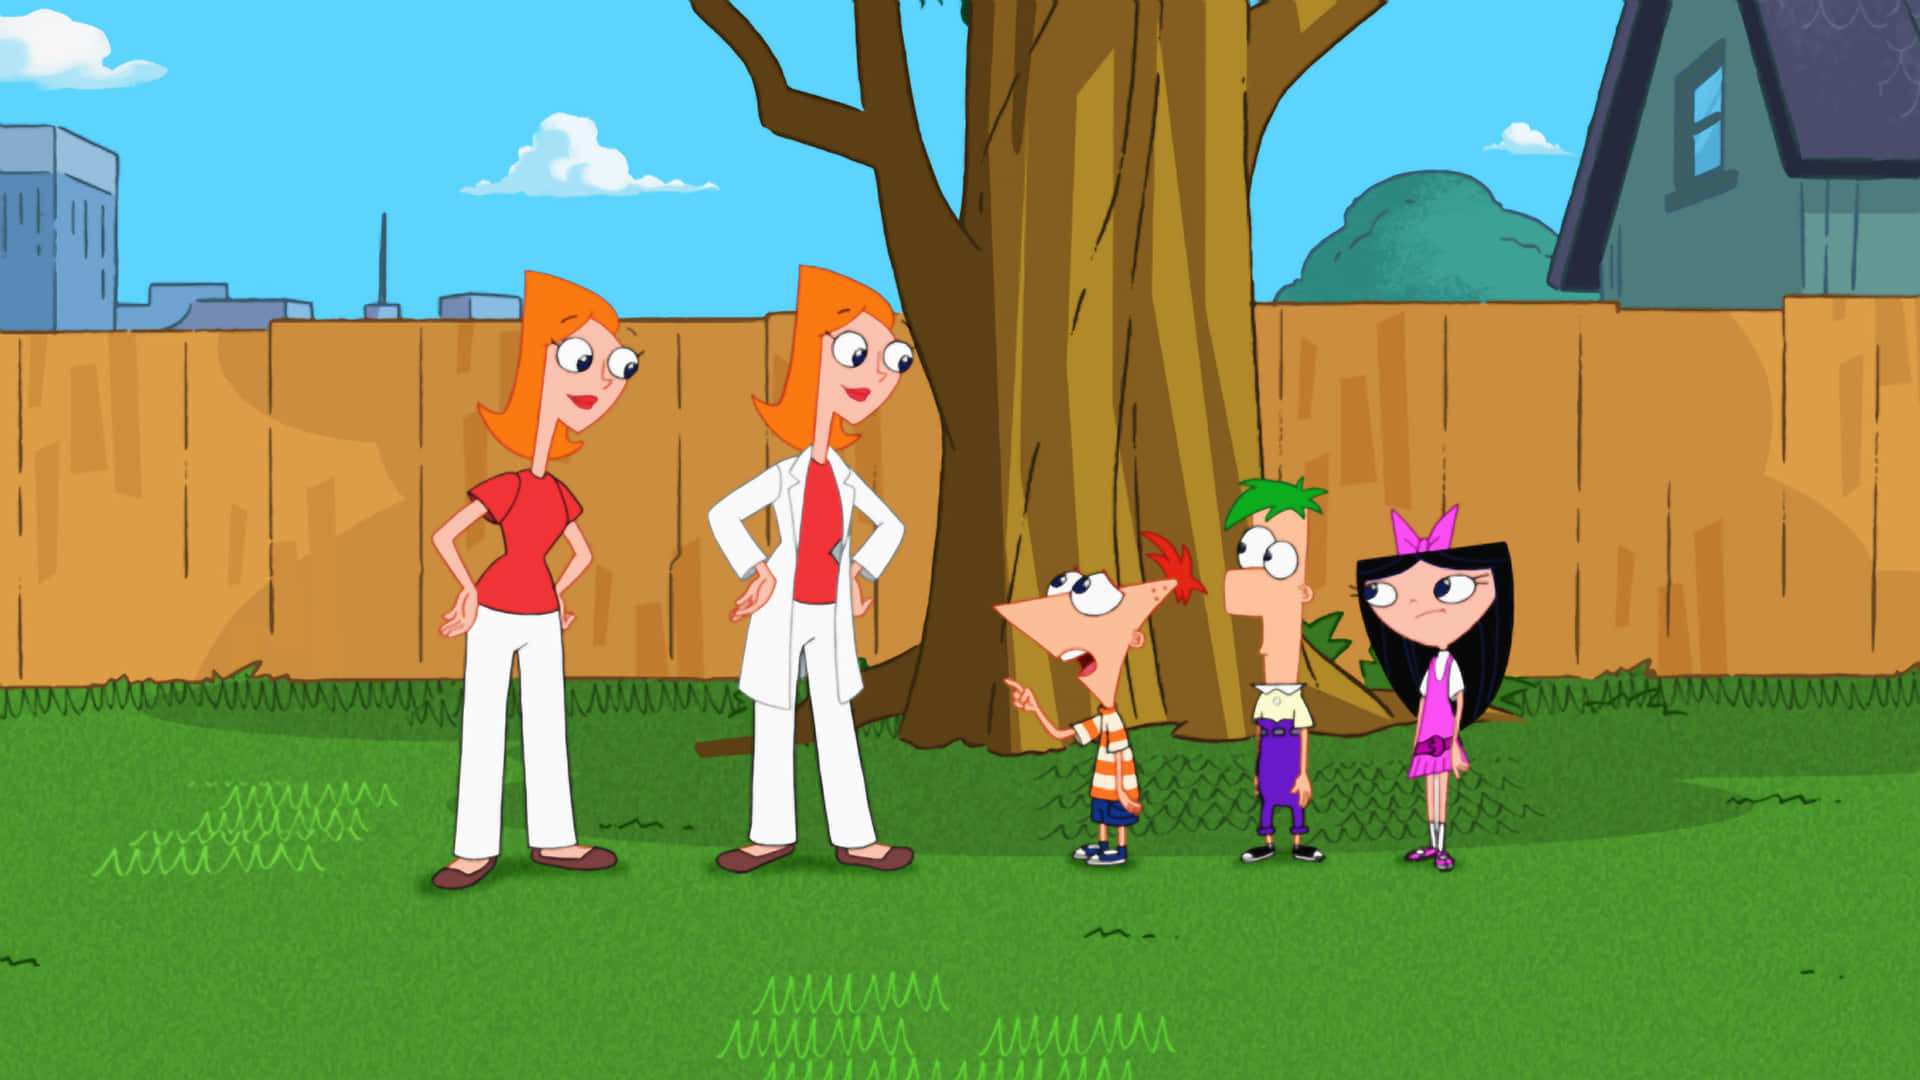 Phineas and Ferb with friends on a summer adventure in their backyard